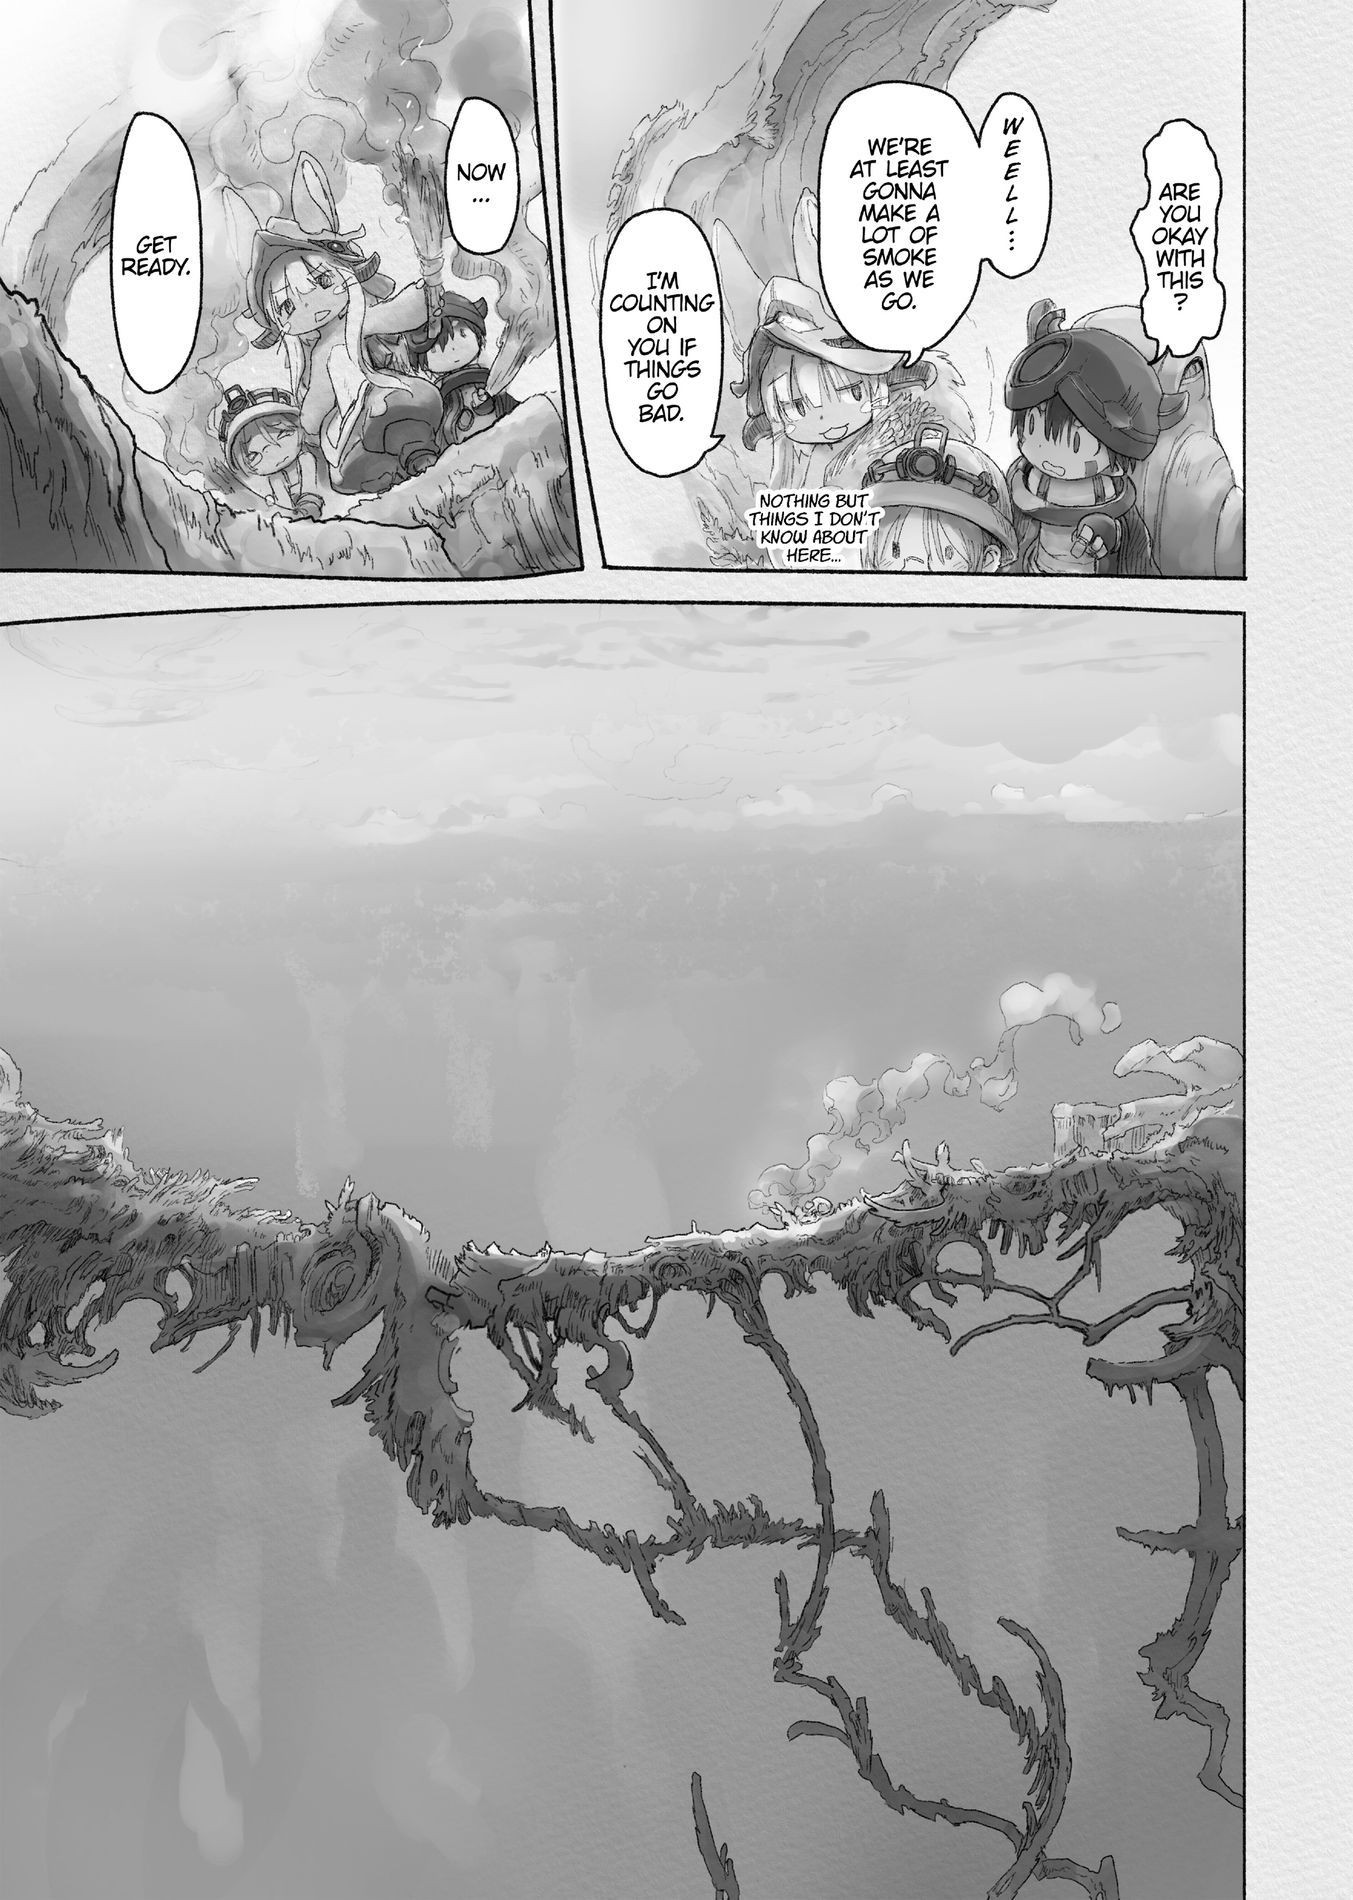 Made in Abyss, Chapter 40 - Made in Abyss Manga Online